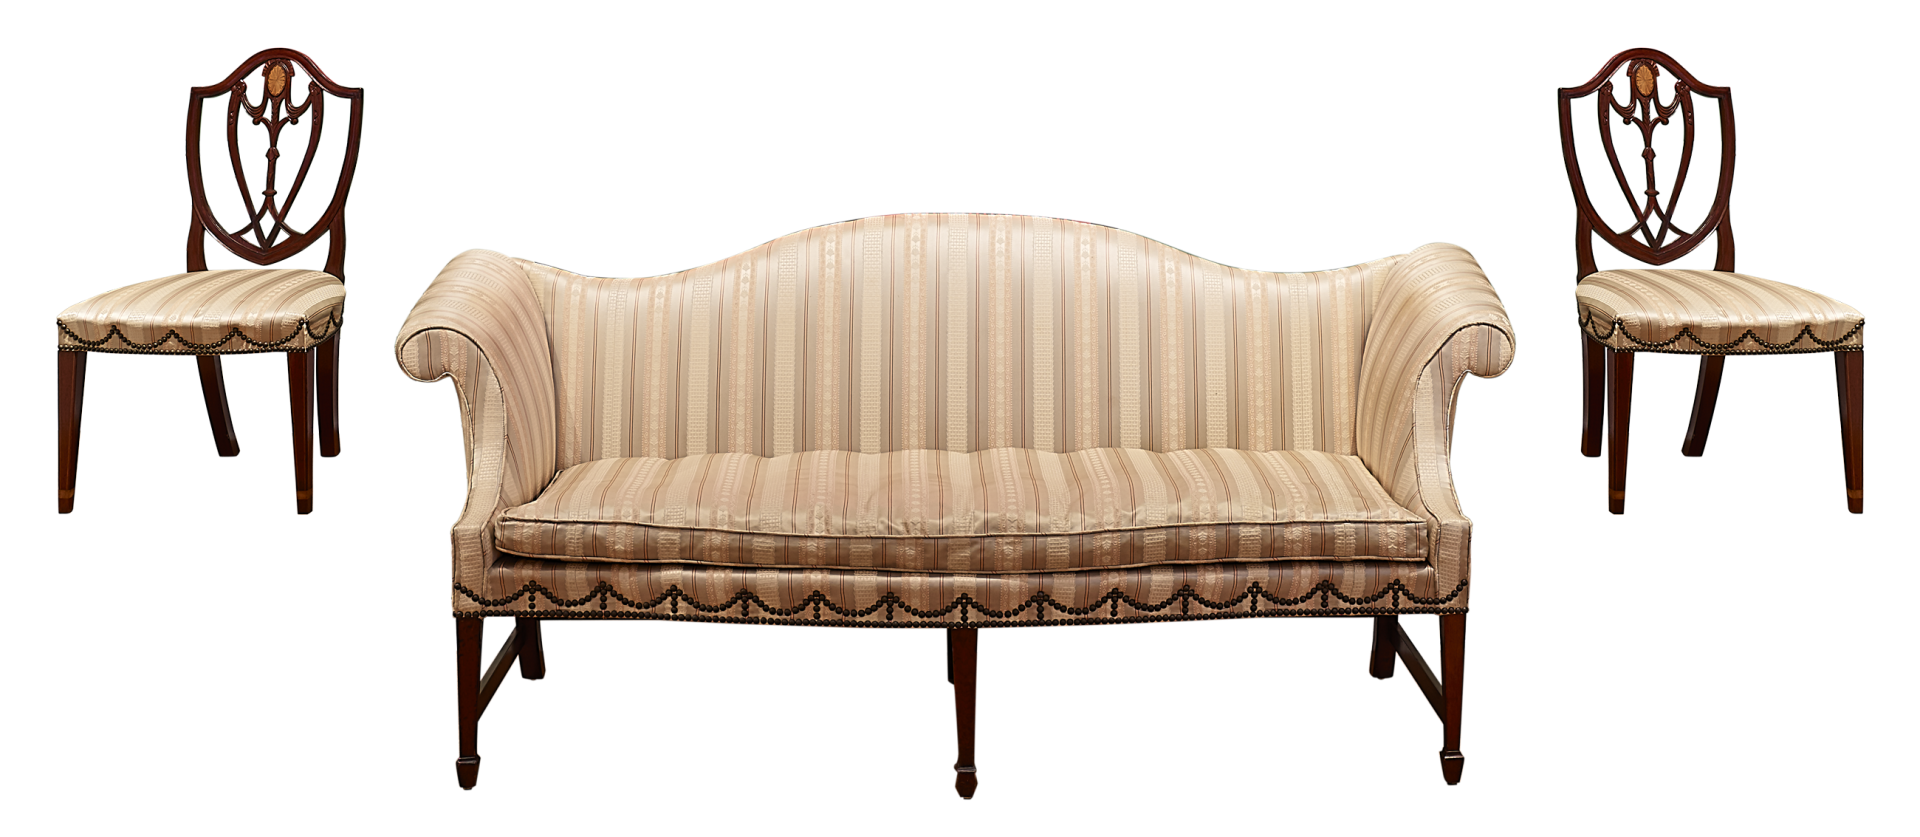 two wooden side chairs with cream upholstered seats, American, ca. 1800 flanking a couch upholstered with the same fabric, also American, ca. 1800